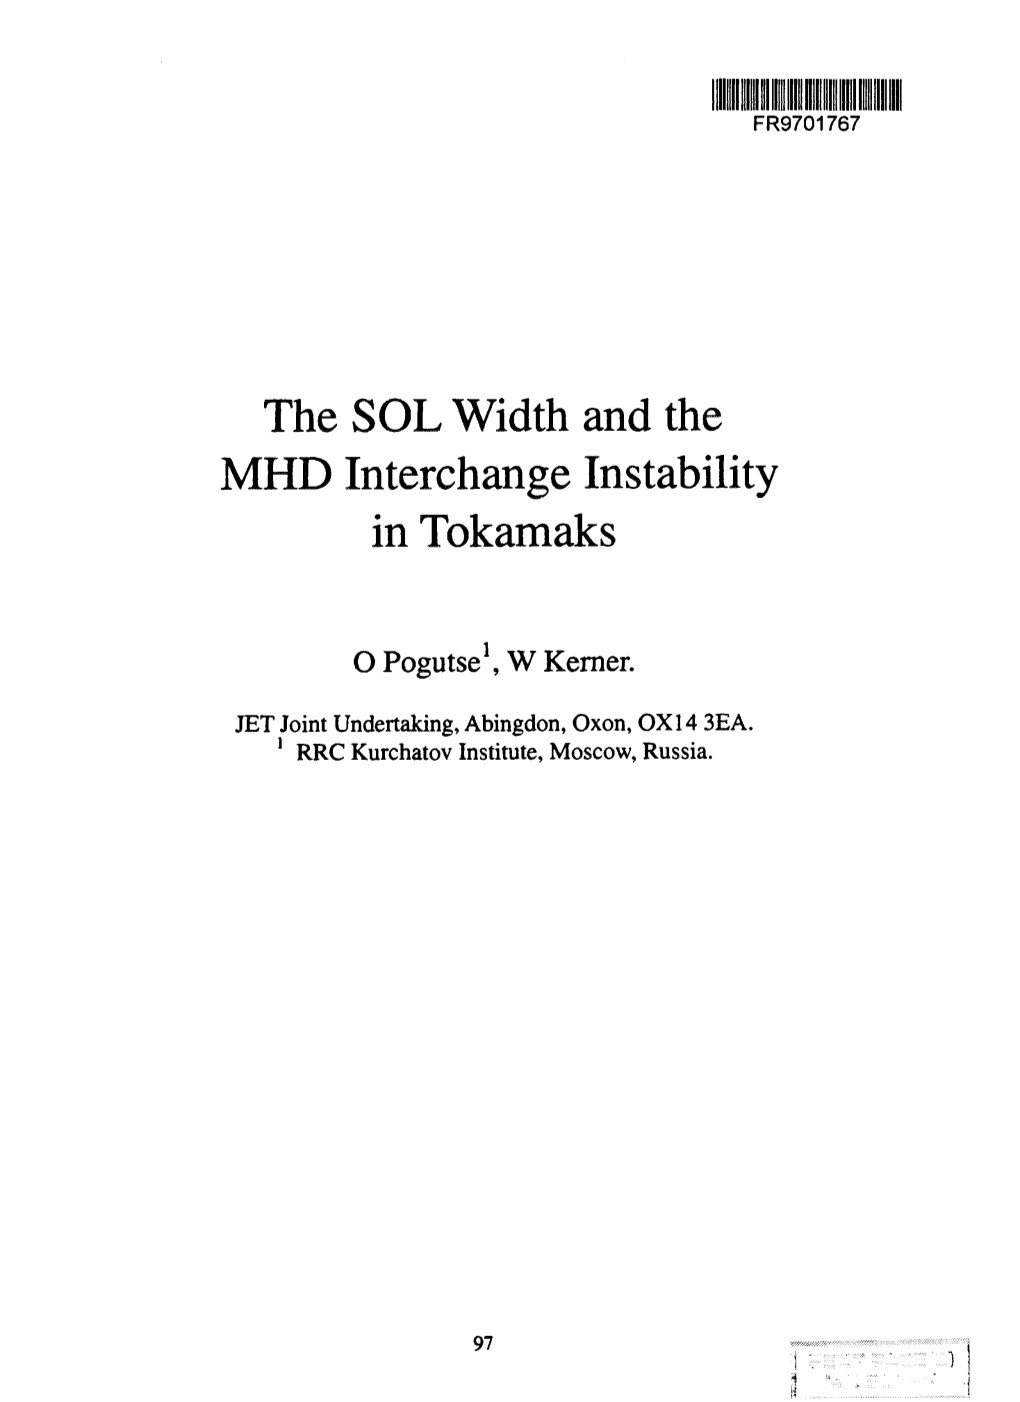 The SOL Width and the MHD Interchange Instability in Tokamaks